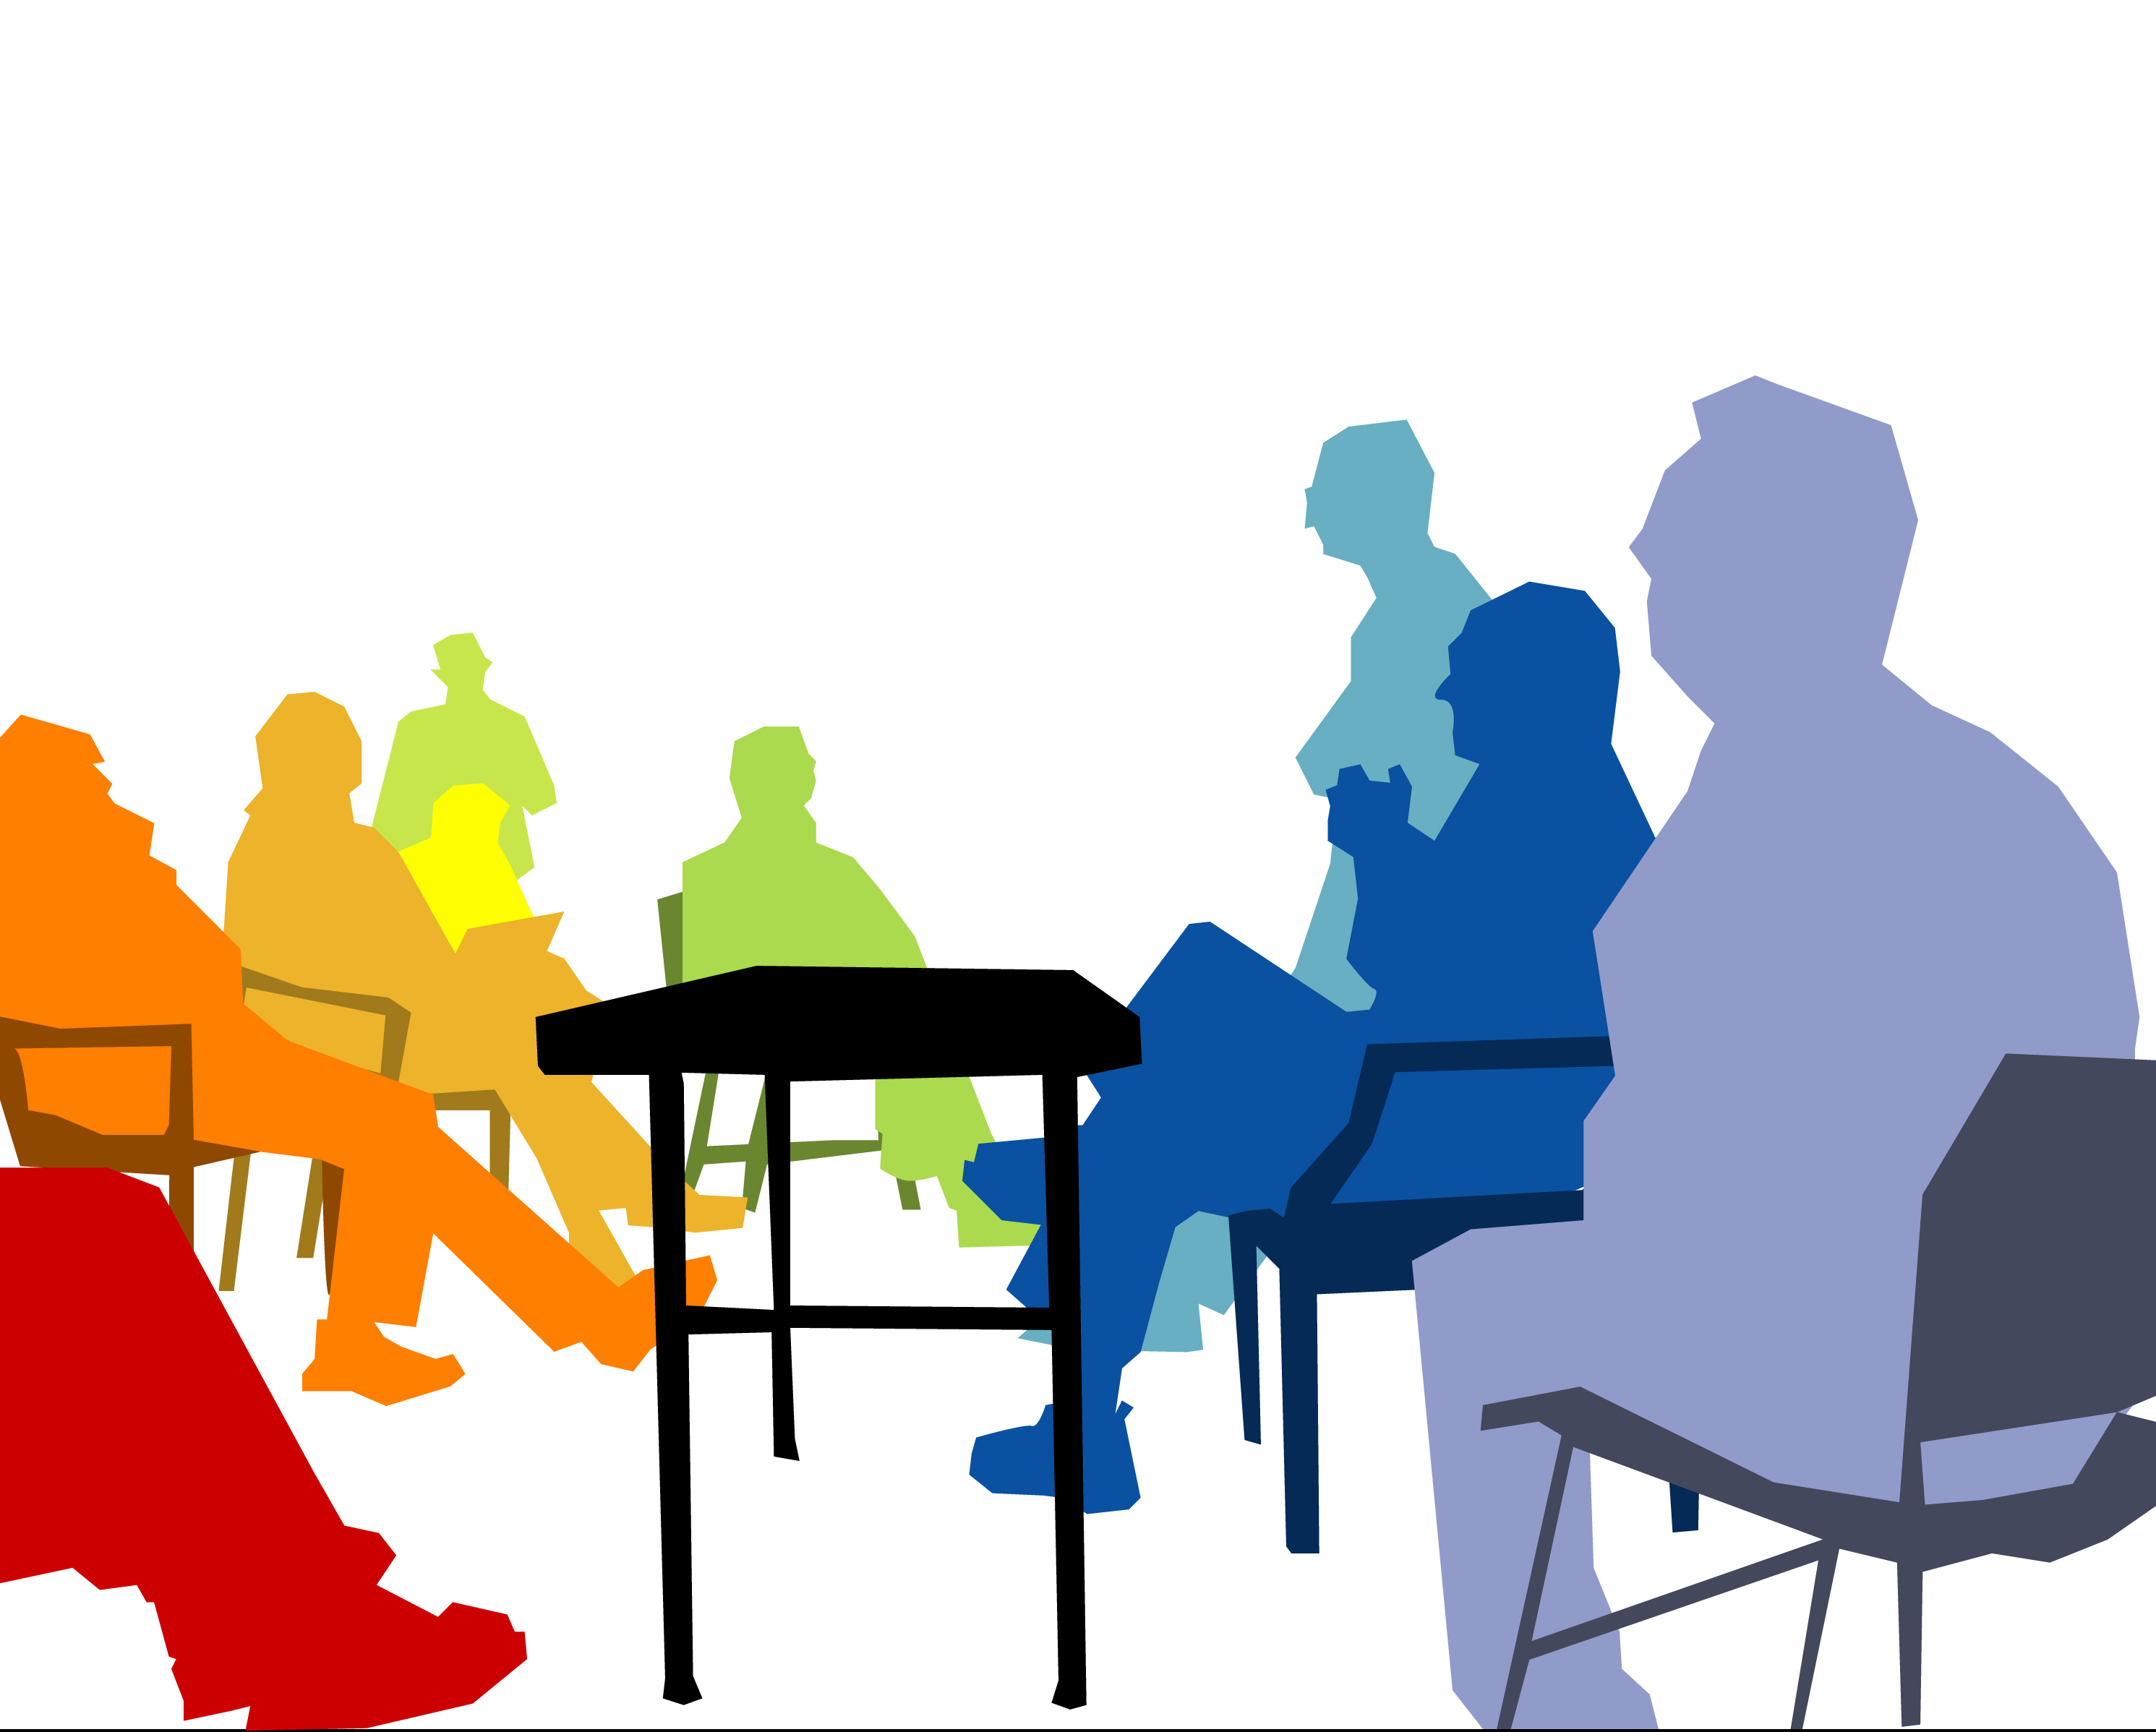 Free Business Meeting Images, Download Free Clip Art, Free